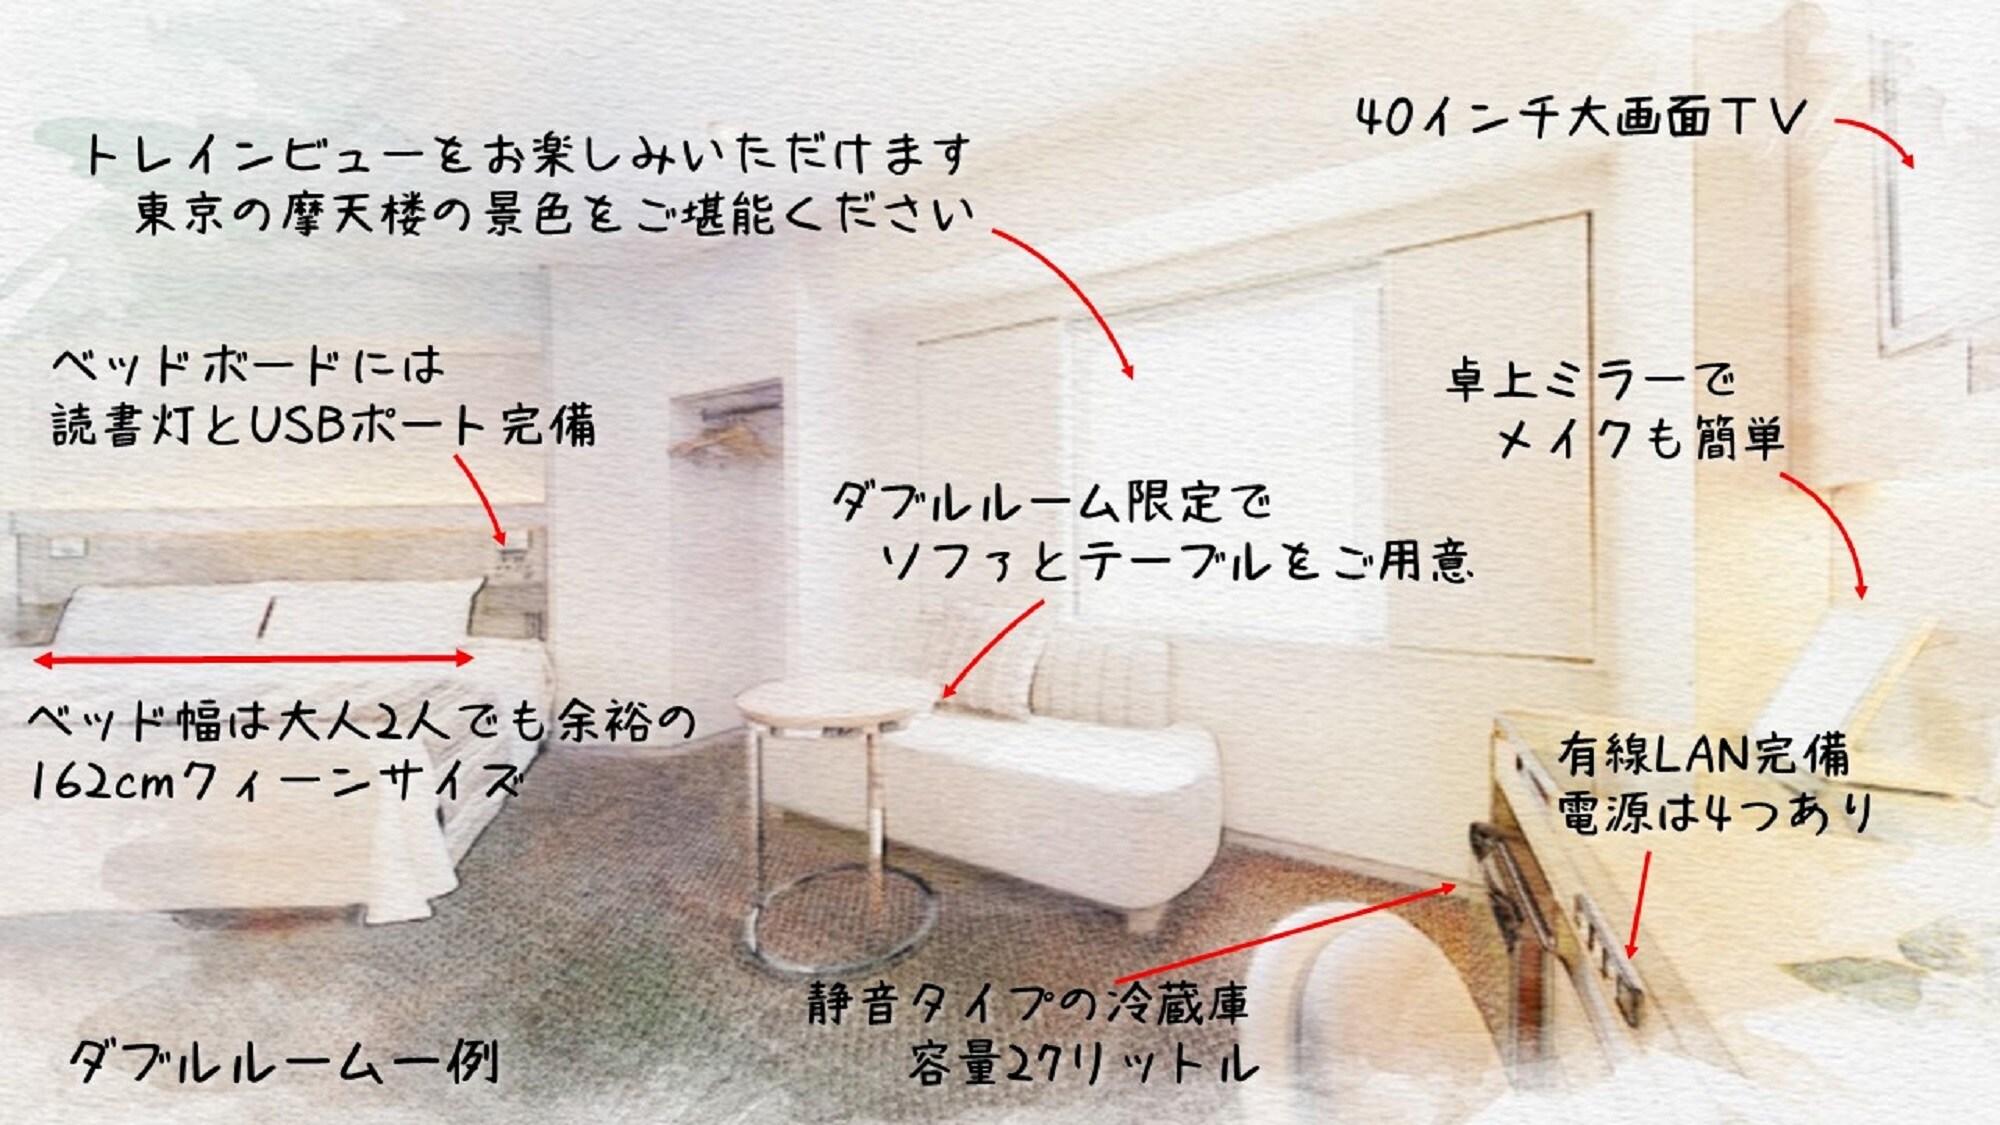 Double room introduction illustration